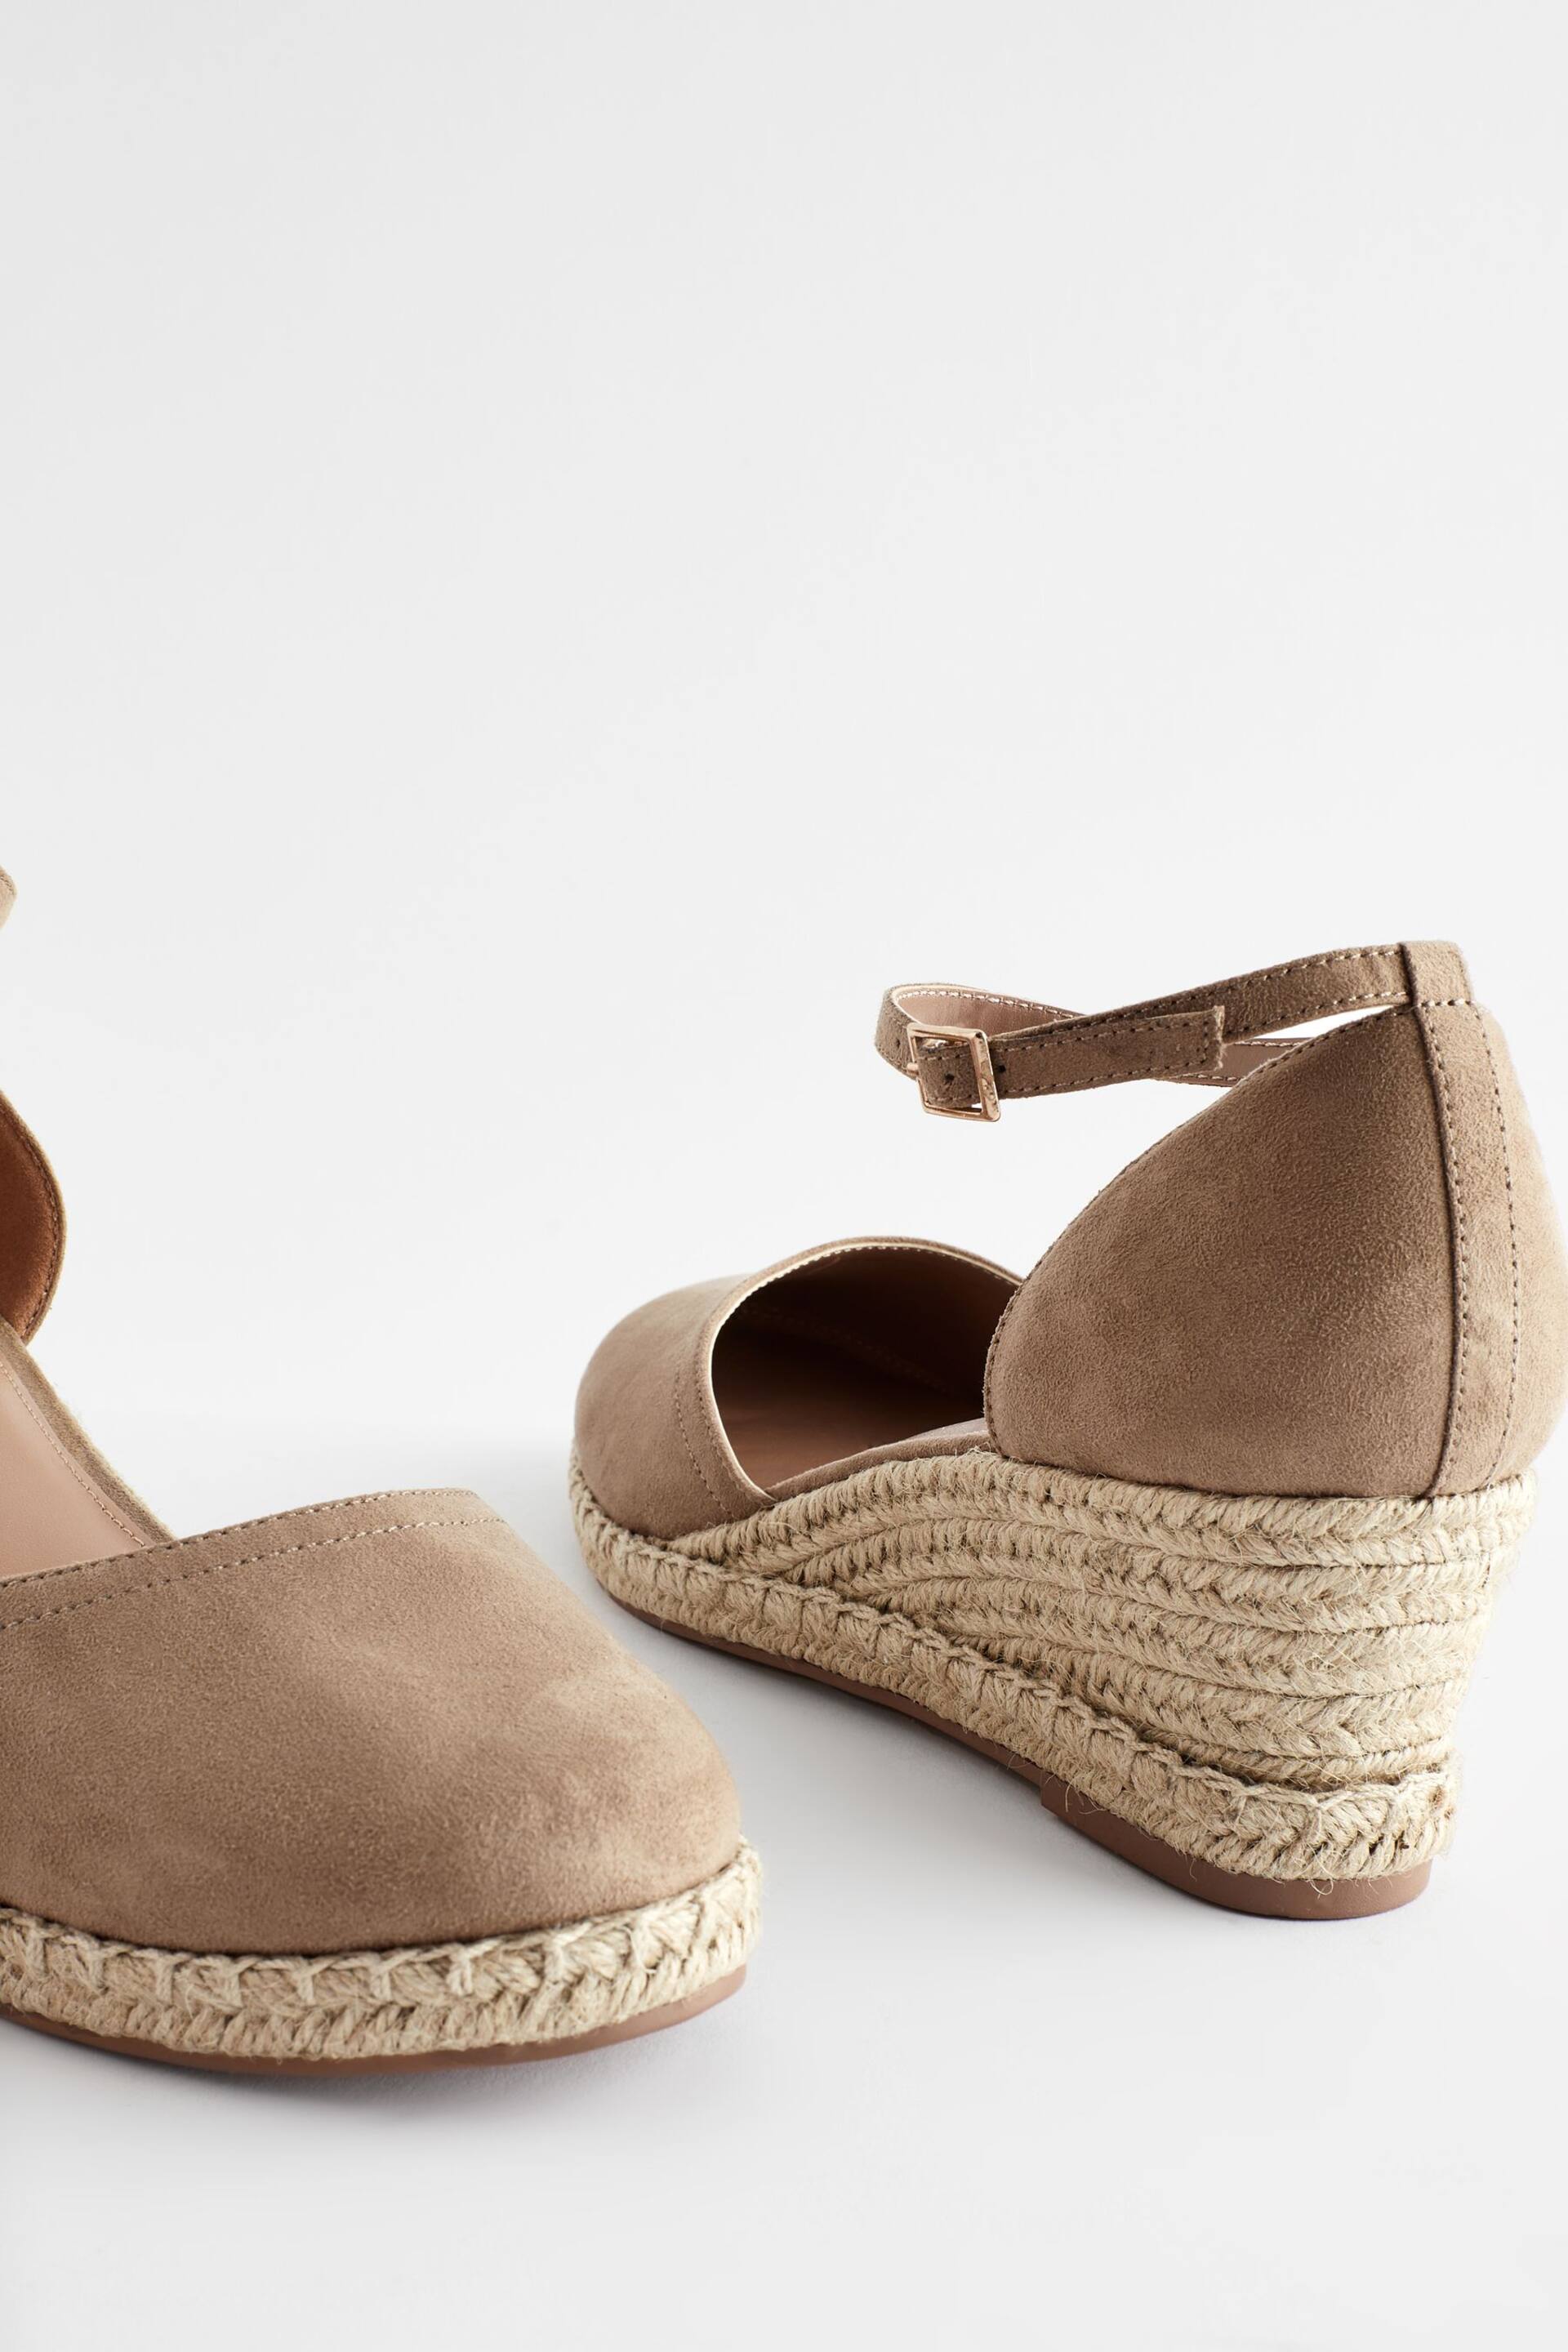 Sand Forever Comfort® Closed Toe Wedges - Image 7 of 9